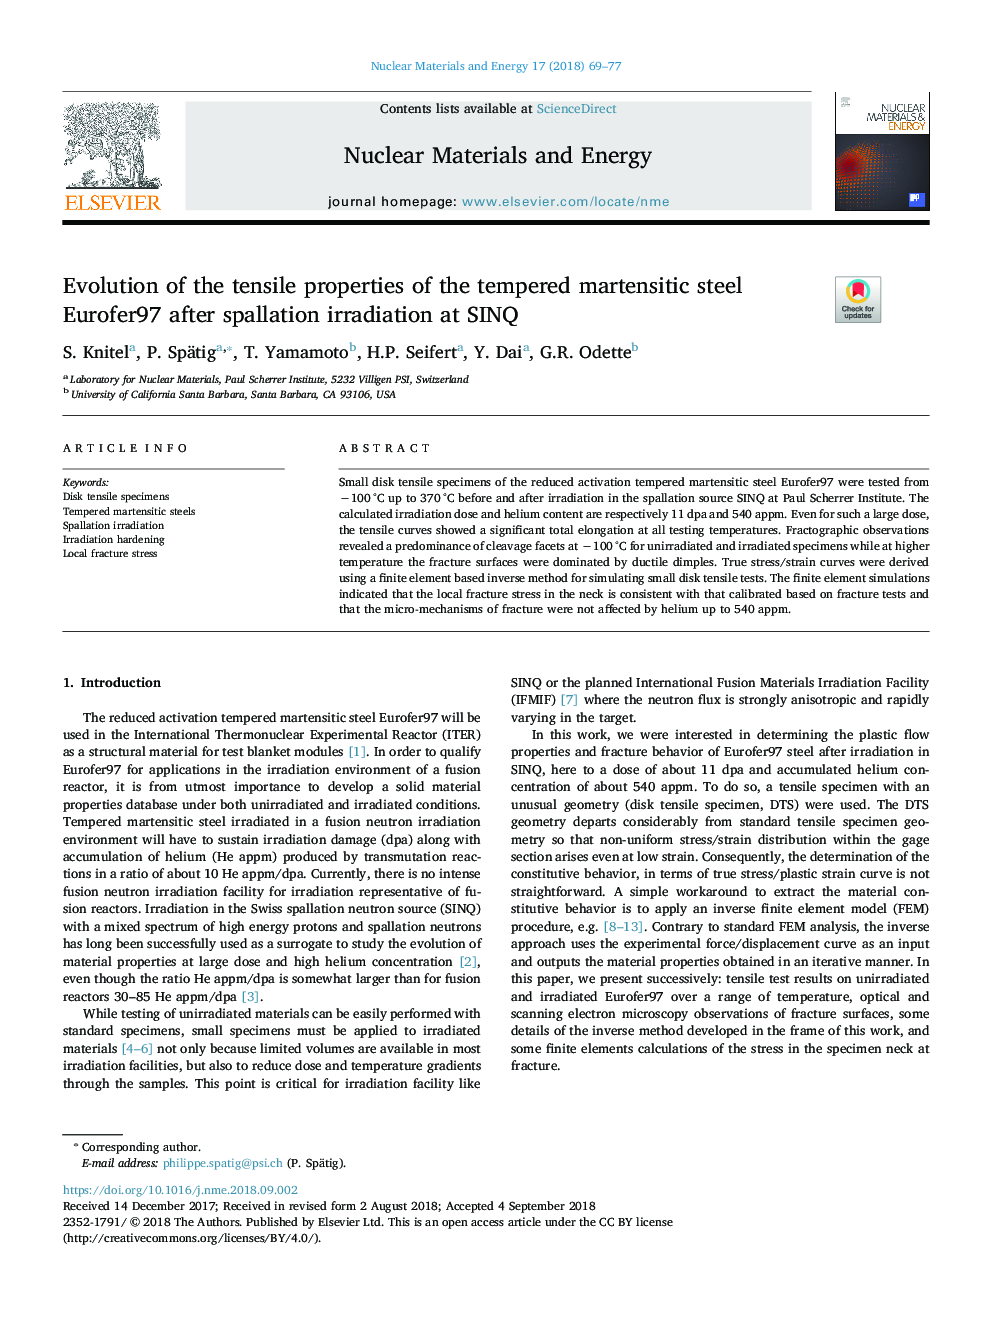 Evolution of the tensile properties of the tempered martensitic steel Eurofer97 after spallation irradiation at SINQ